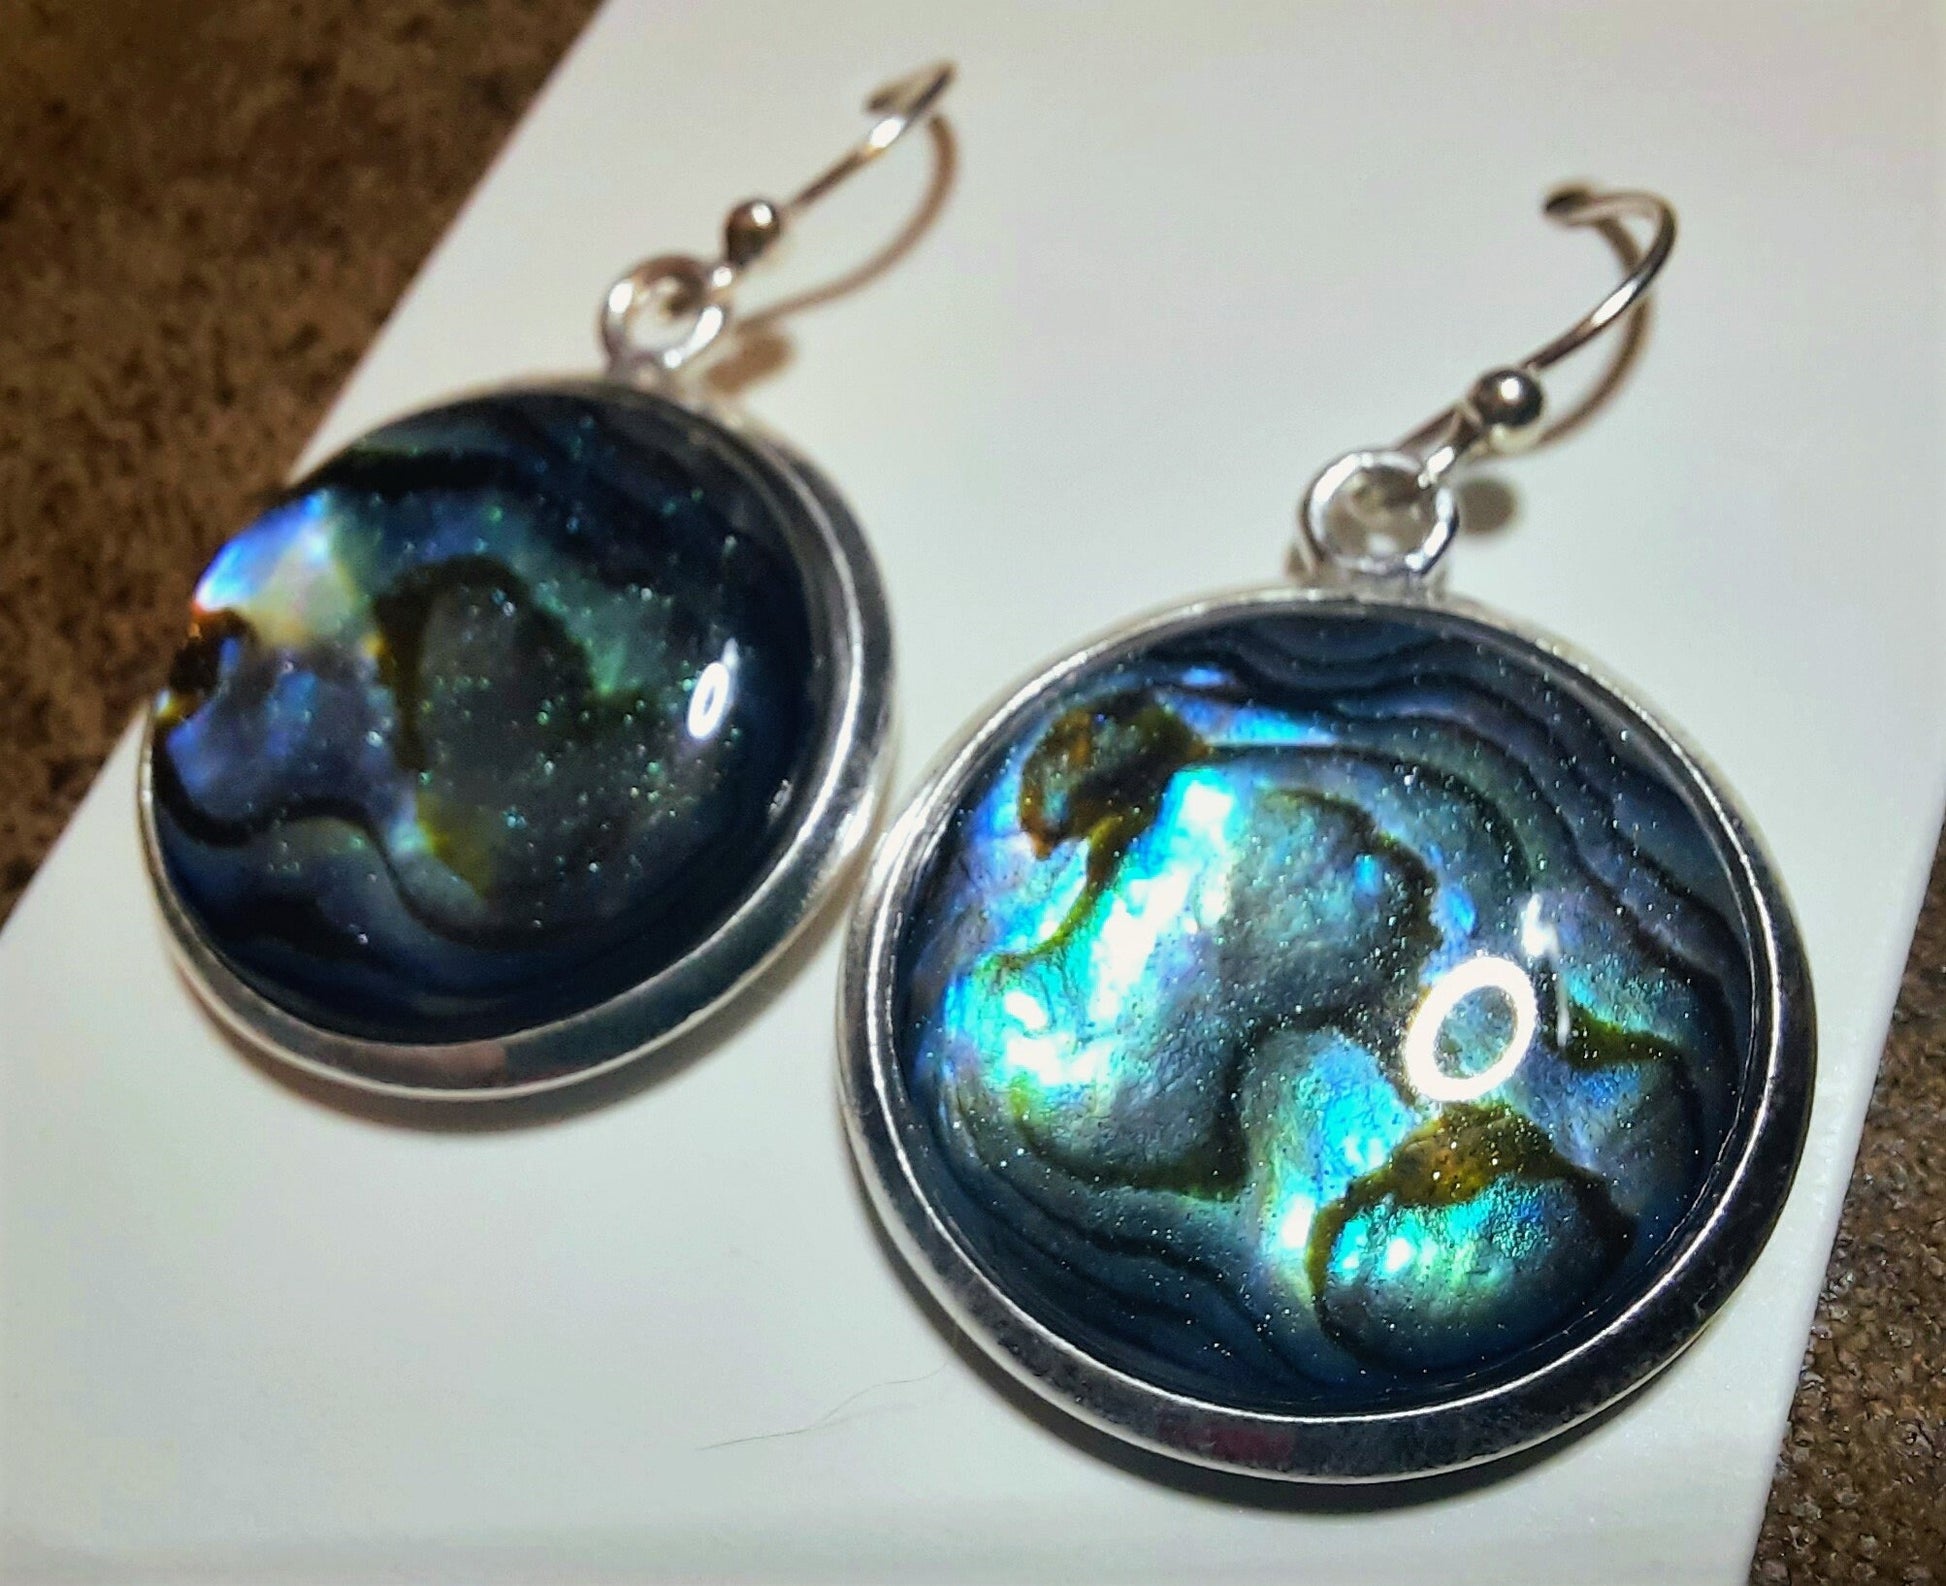 Handmade / Handcrafted 925 Sterling Silver Natural Blue Abalone / Paua Seashell Earrings, Sealed with Holographic Mica Infused Resin